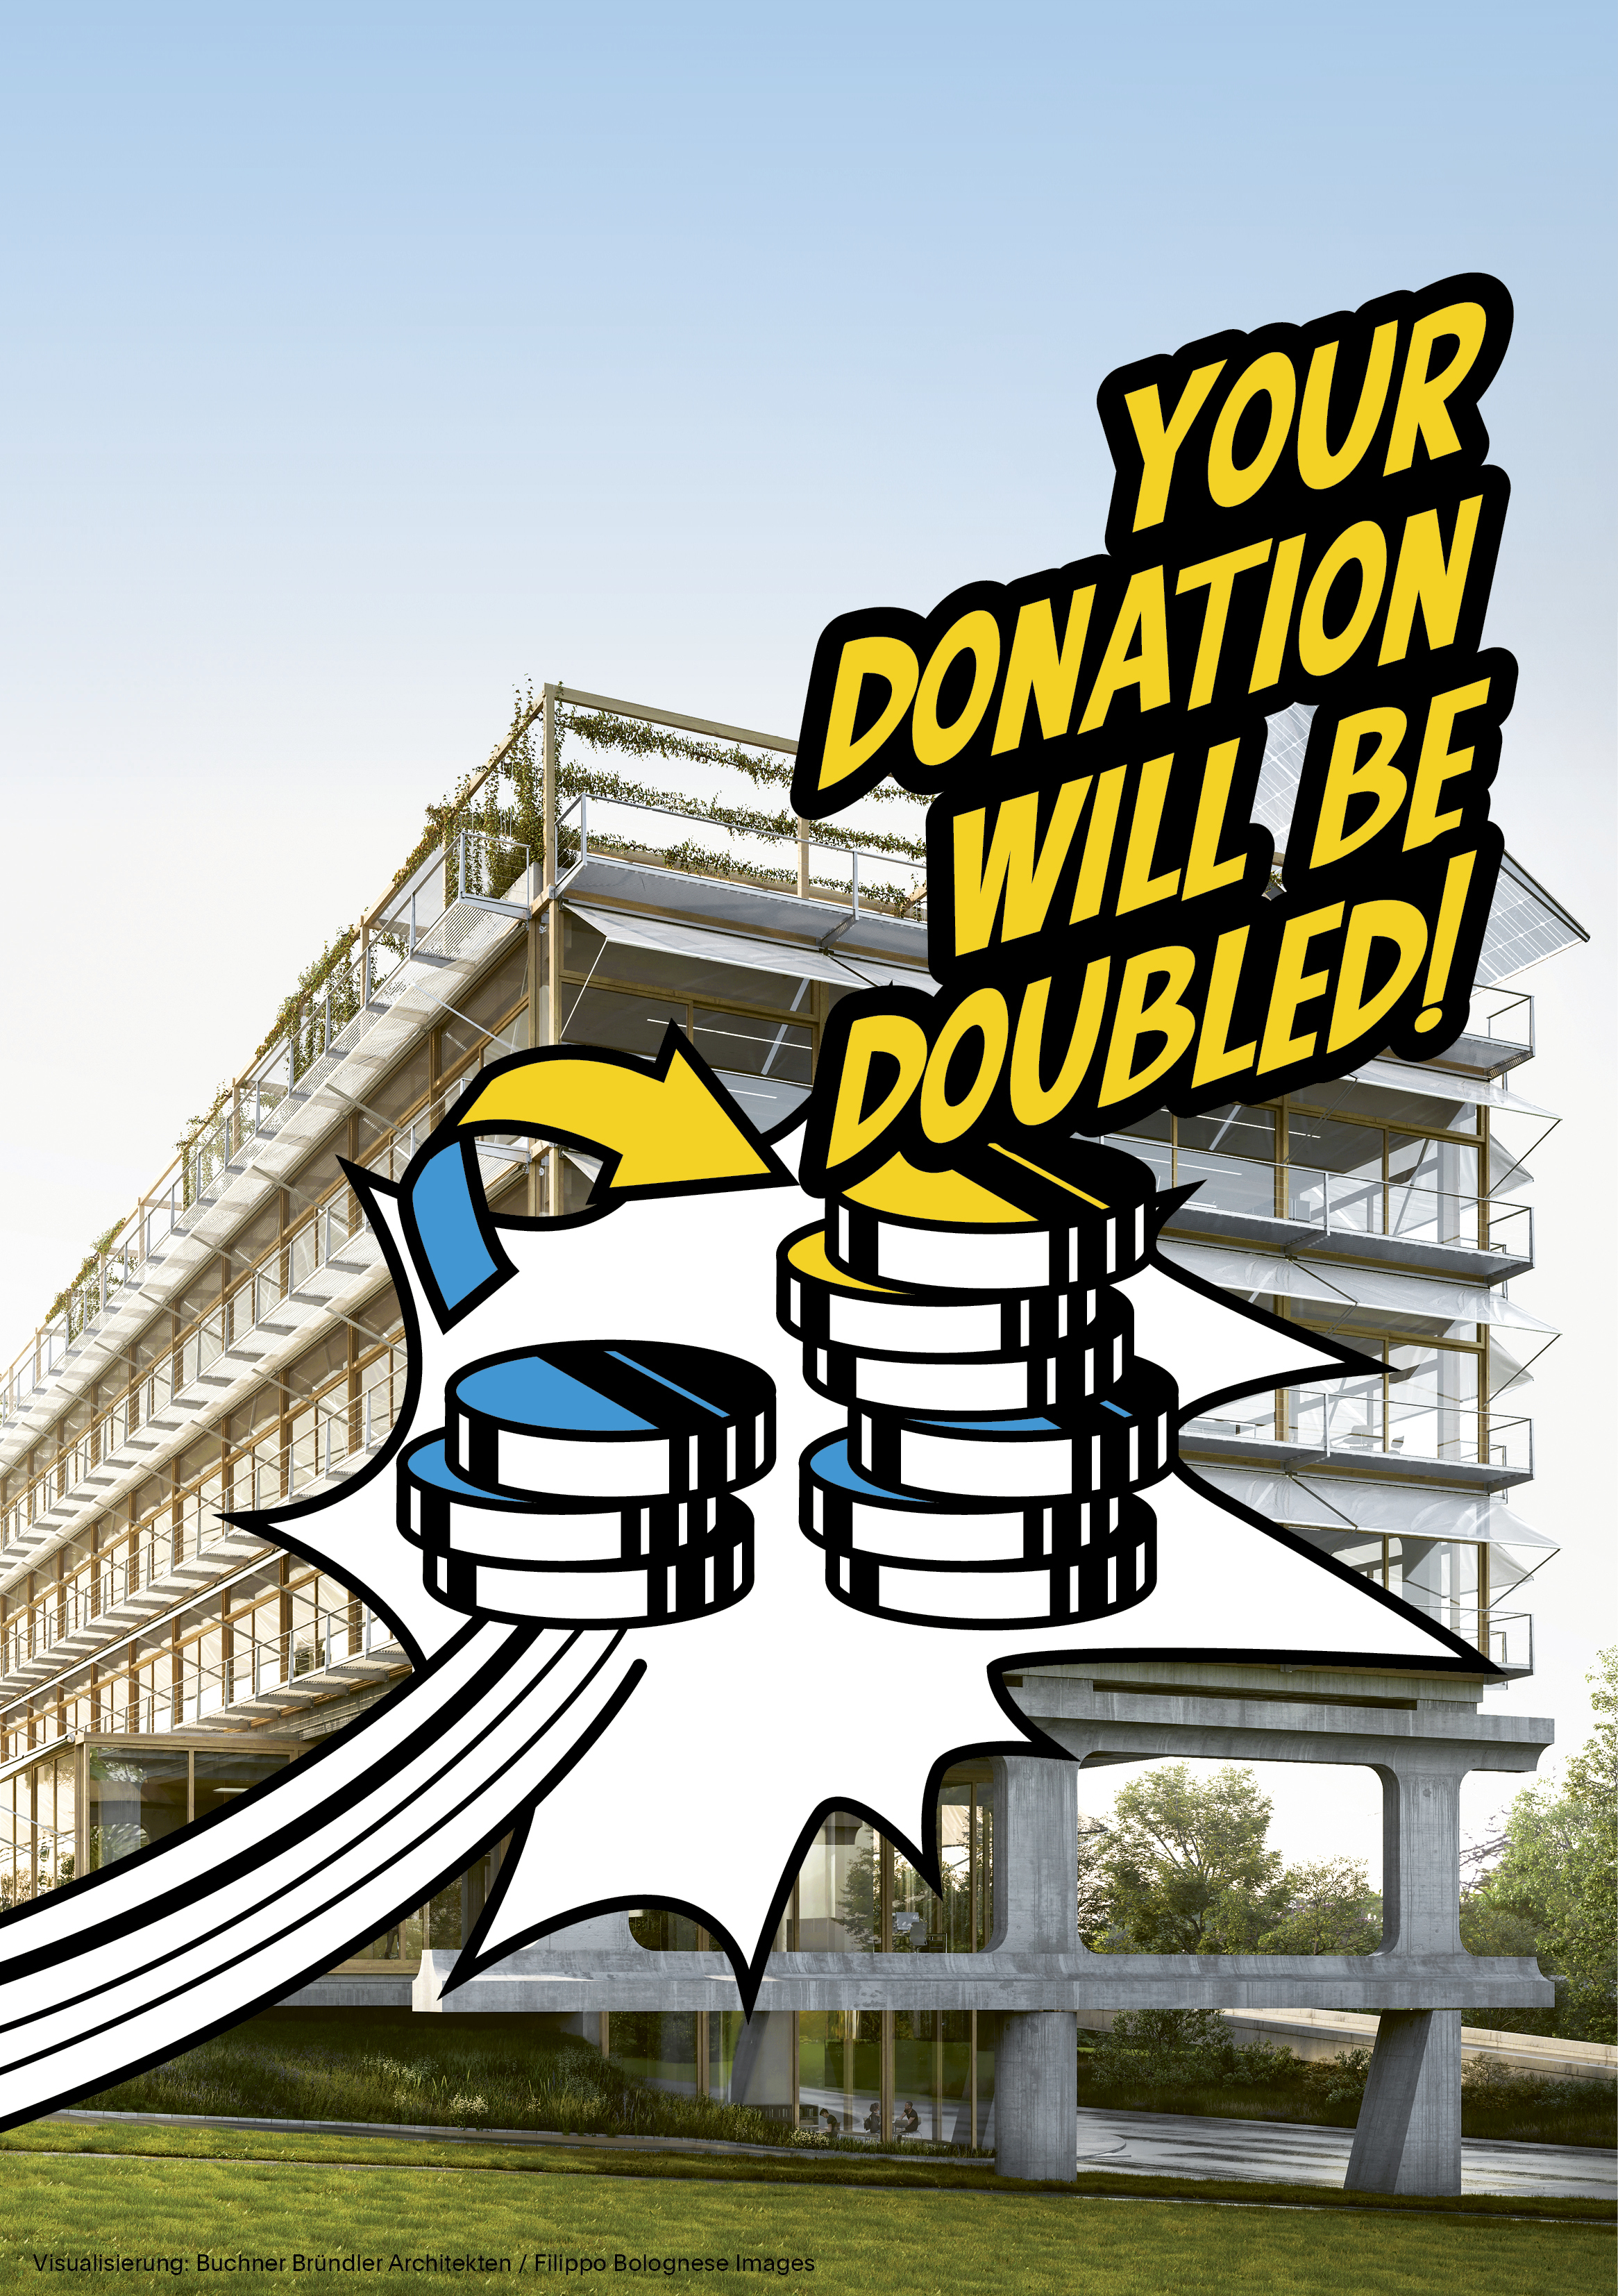 Your Donnation will be doubled!